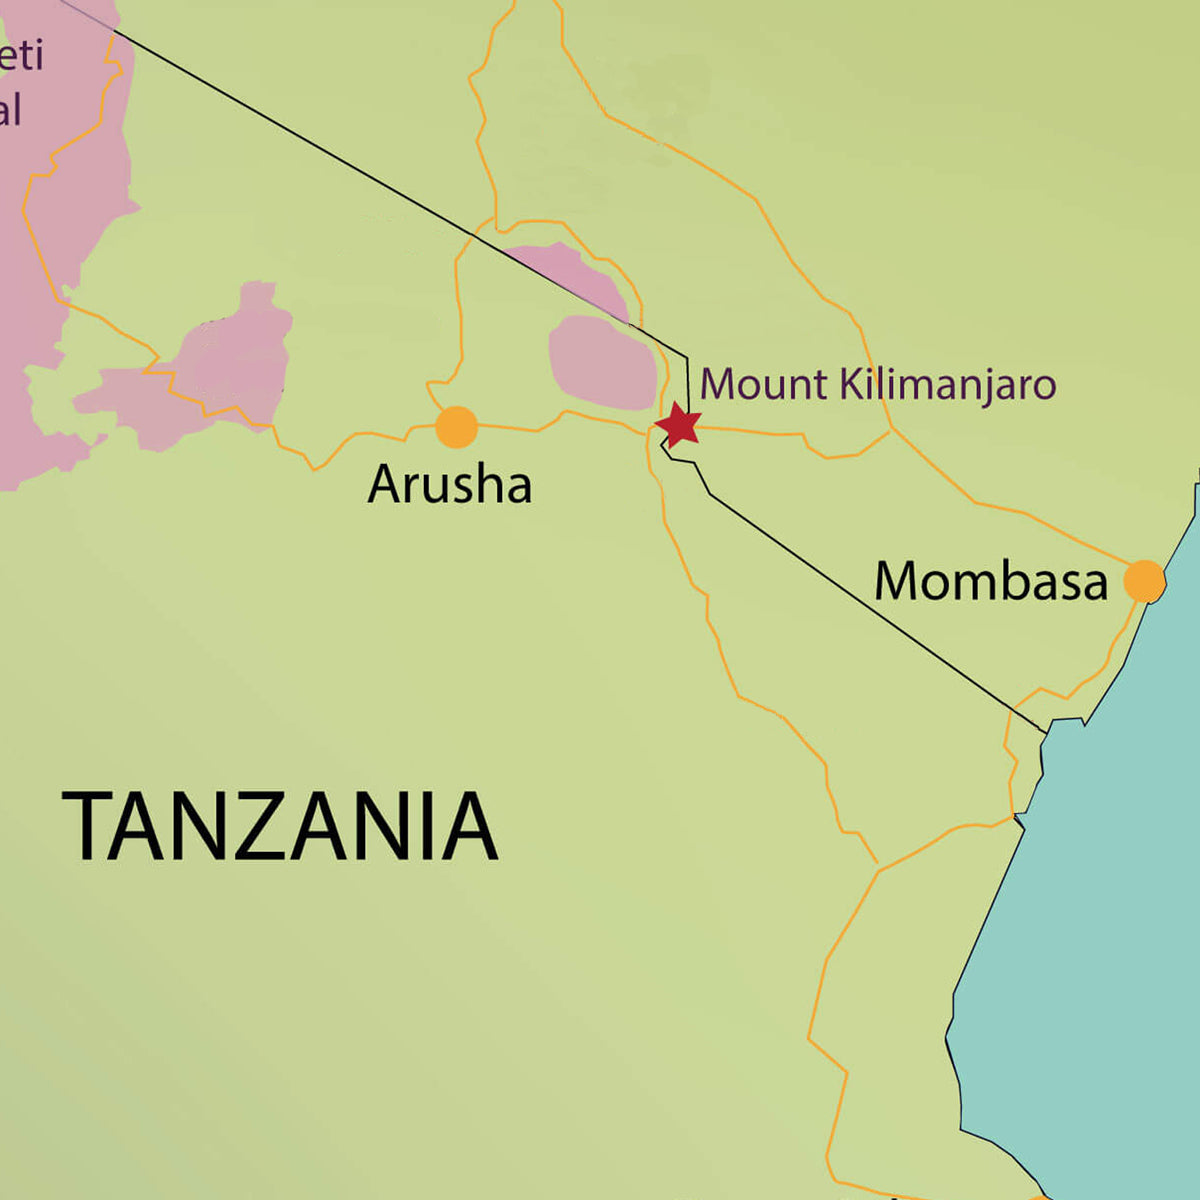 Close up map of Tanzania with Arusha and Mombassa with Mount Kilimanjaro.